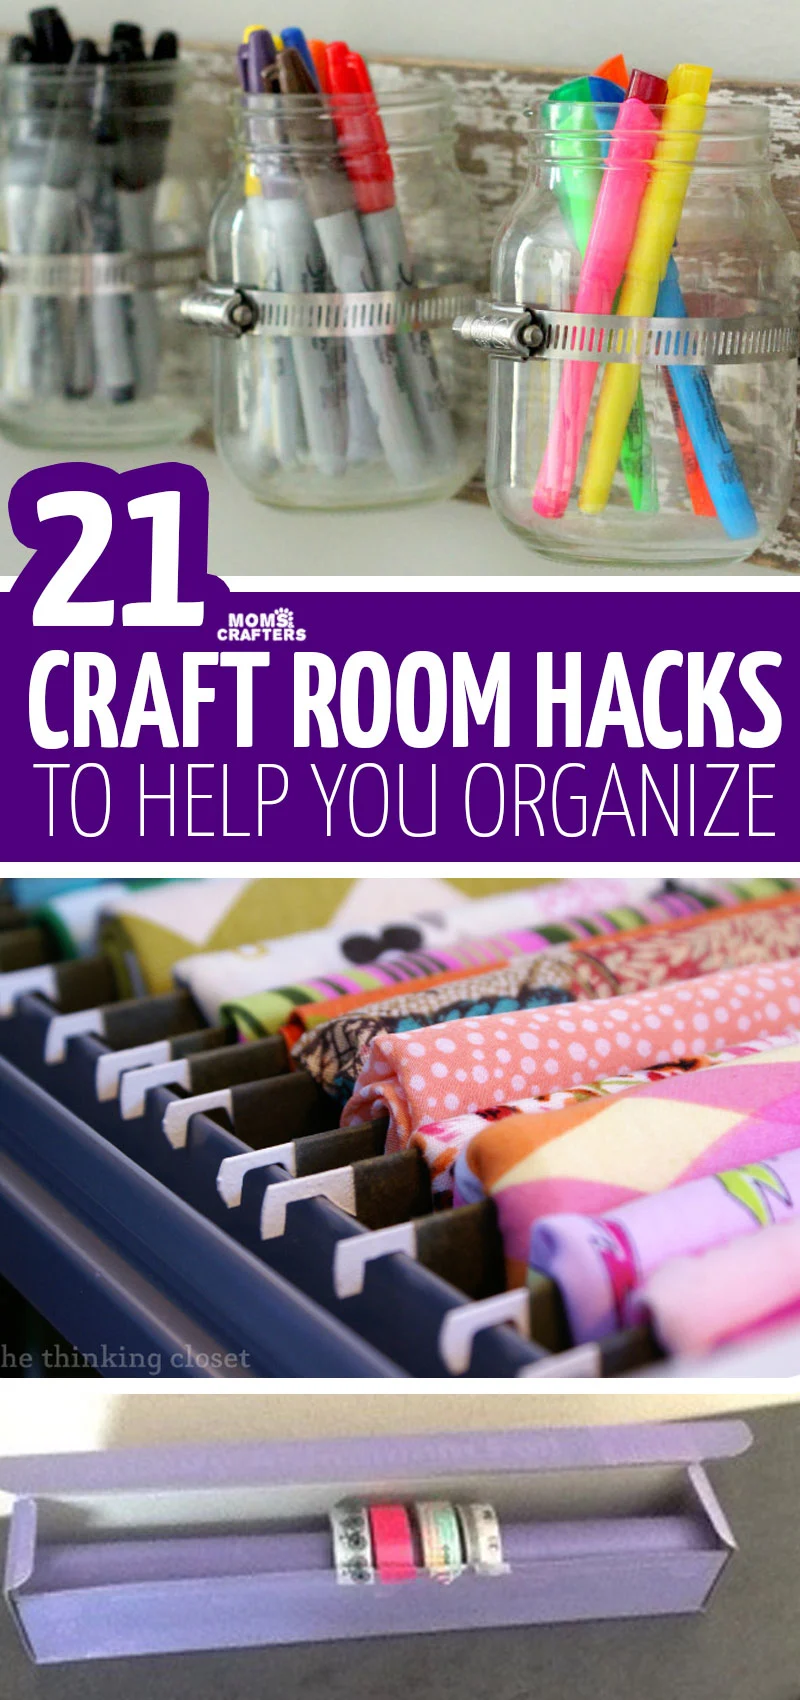 Clickfor craft room organization tips, hacks, and solutions that you can DIY! These cool scraft supplies storage ideas are perfect for organizing your craft room. #craftroom #organization #crafts